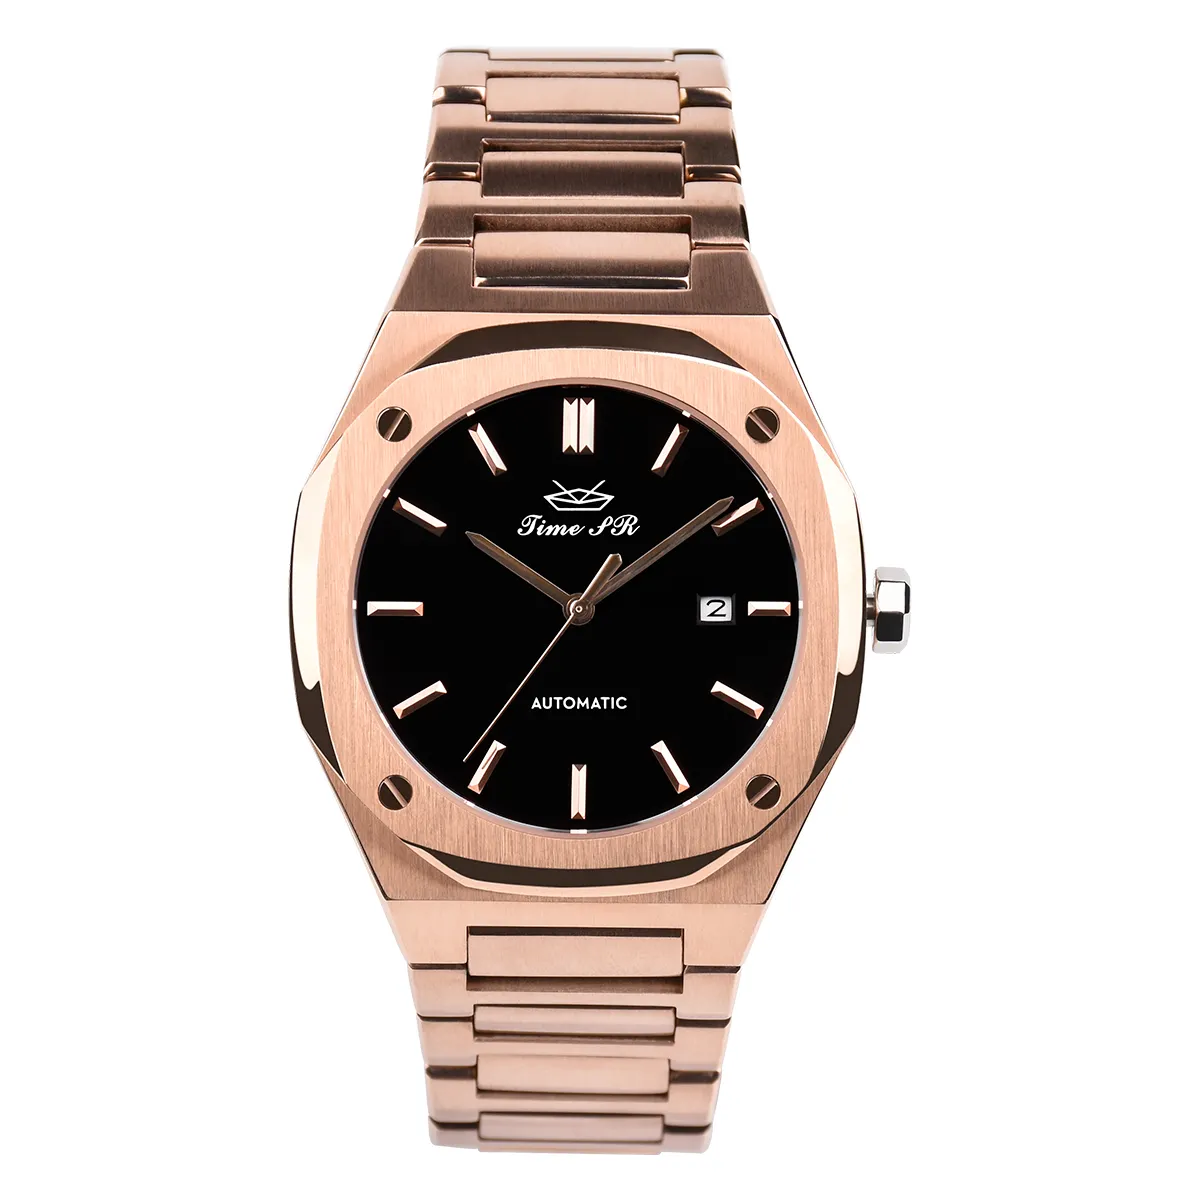 Men's Luxury Wristwatch Stainless Steel Automatic Mechanical Watch Gold Watches